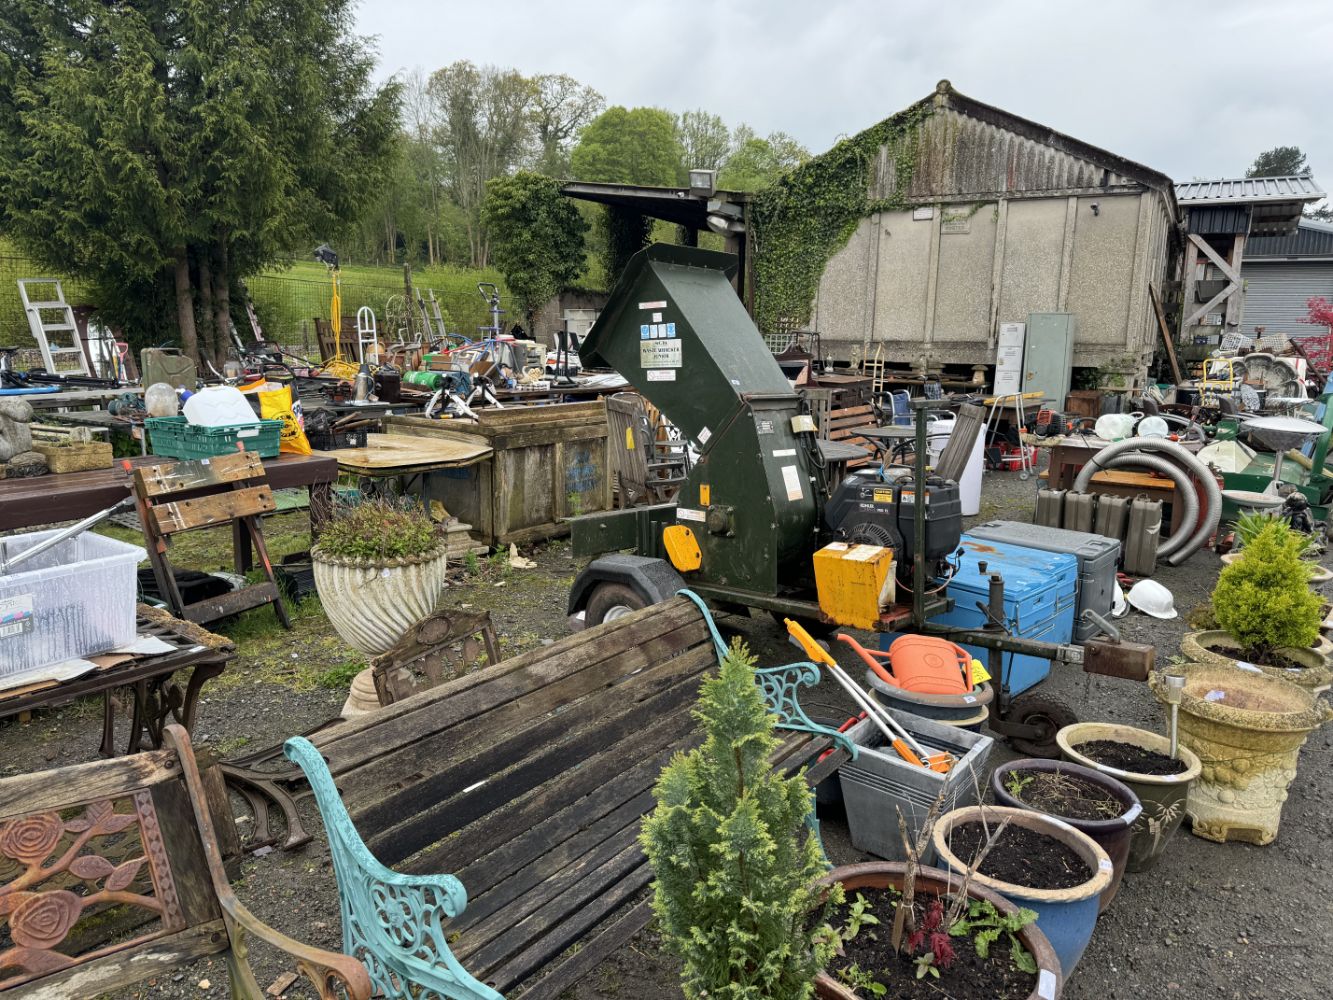 Special May Auction of Vintage & Modern Effects, Tools and Bric-a-Brac